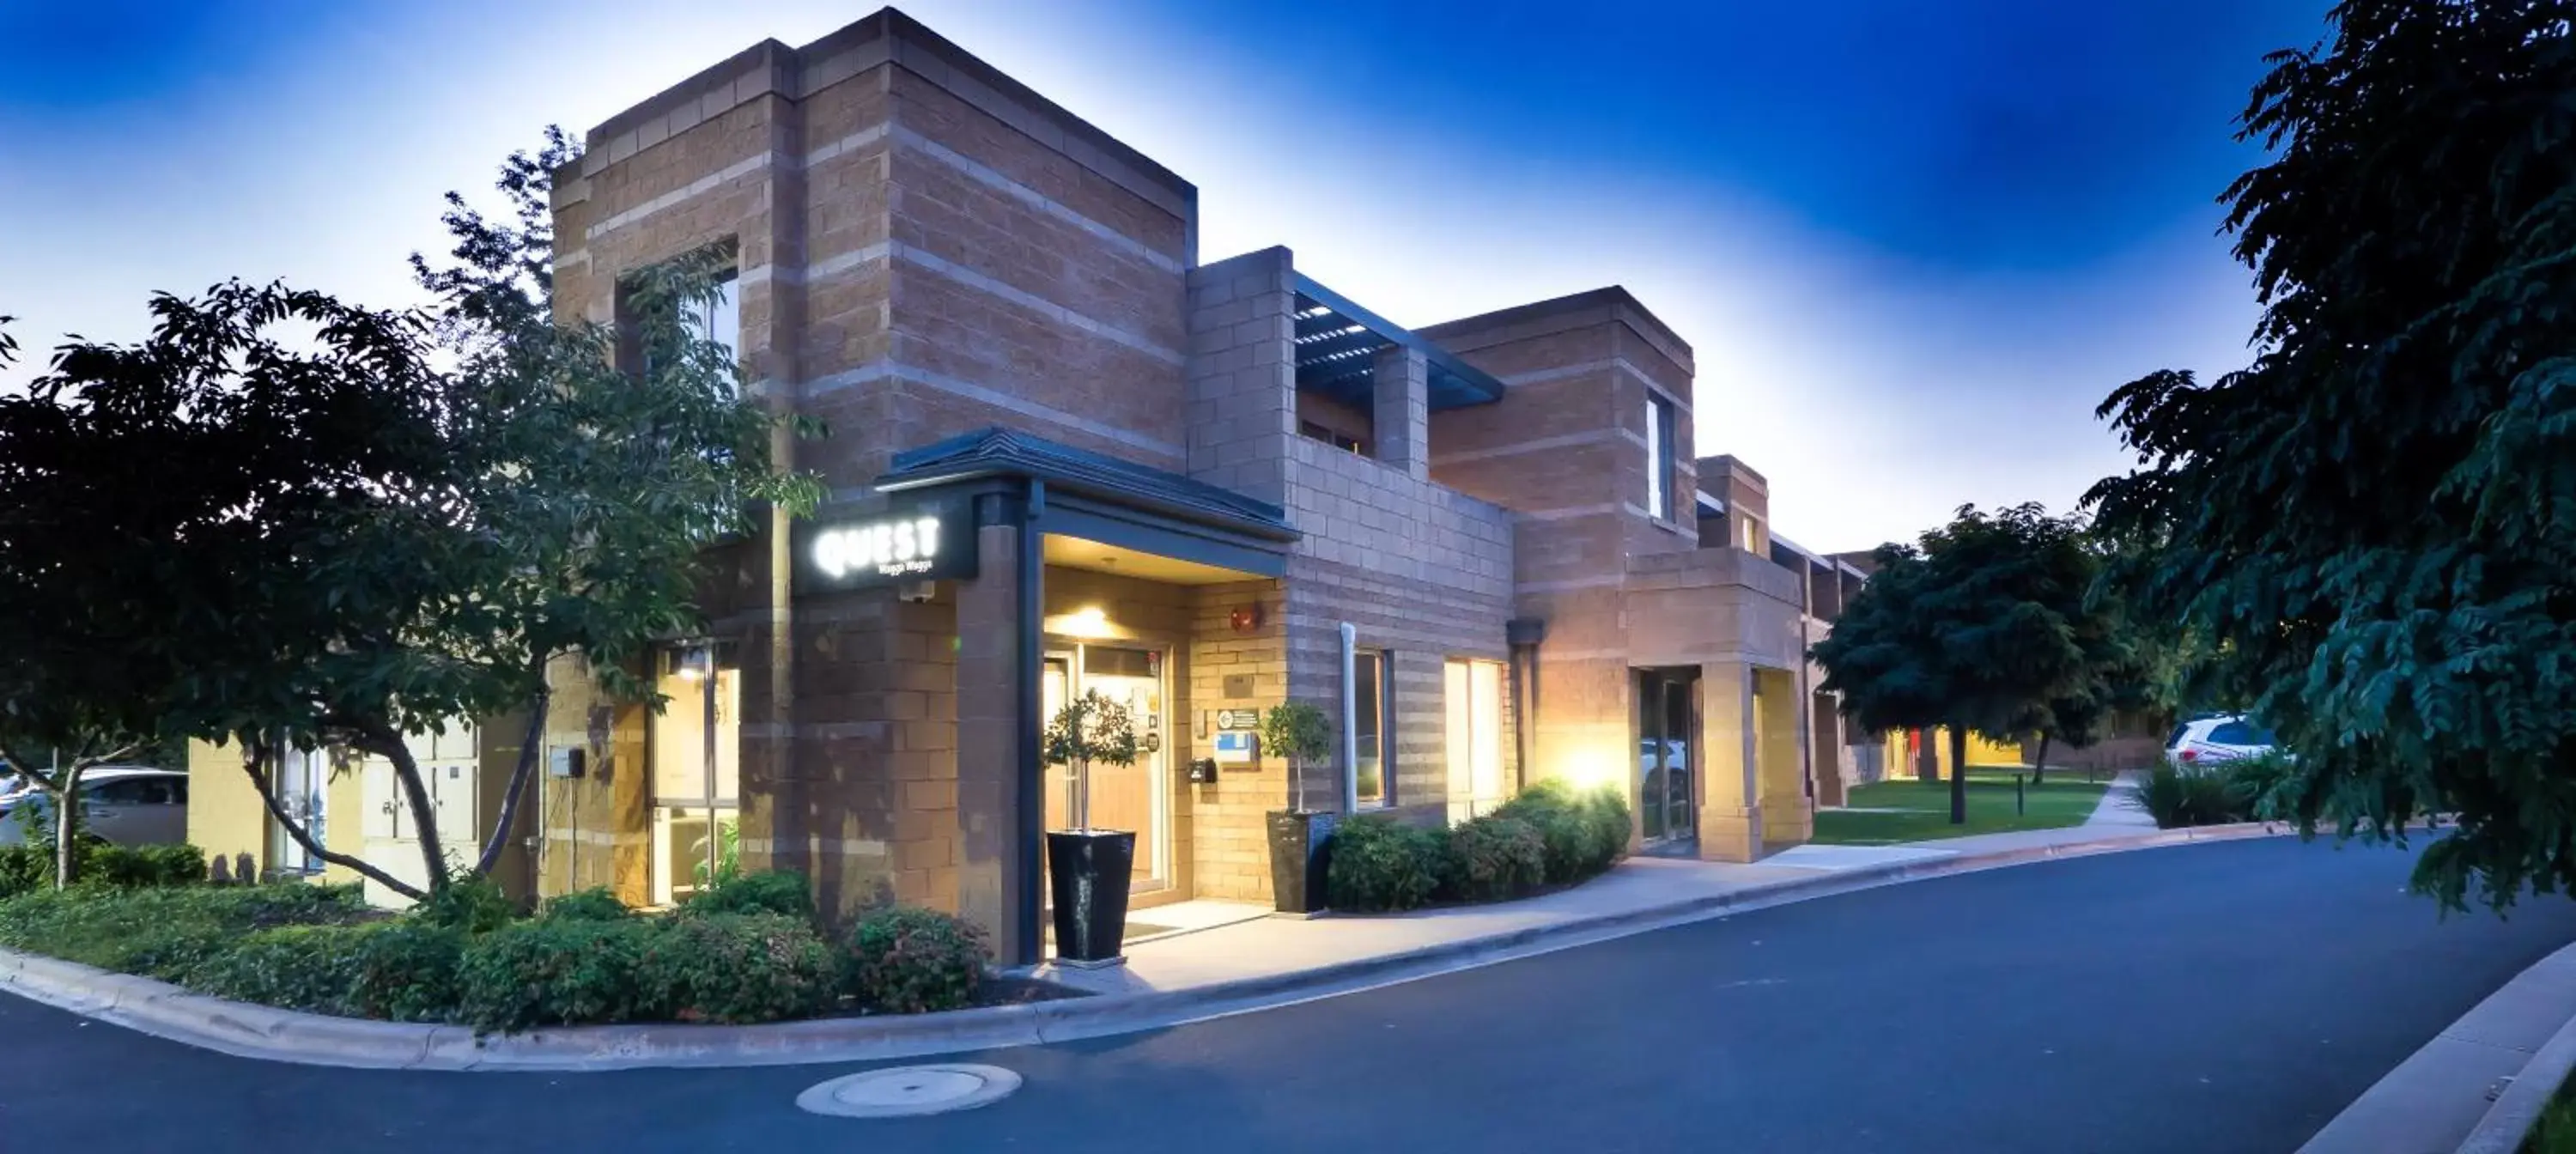 Property Building in Quest Wagga Wagga